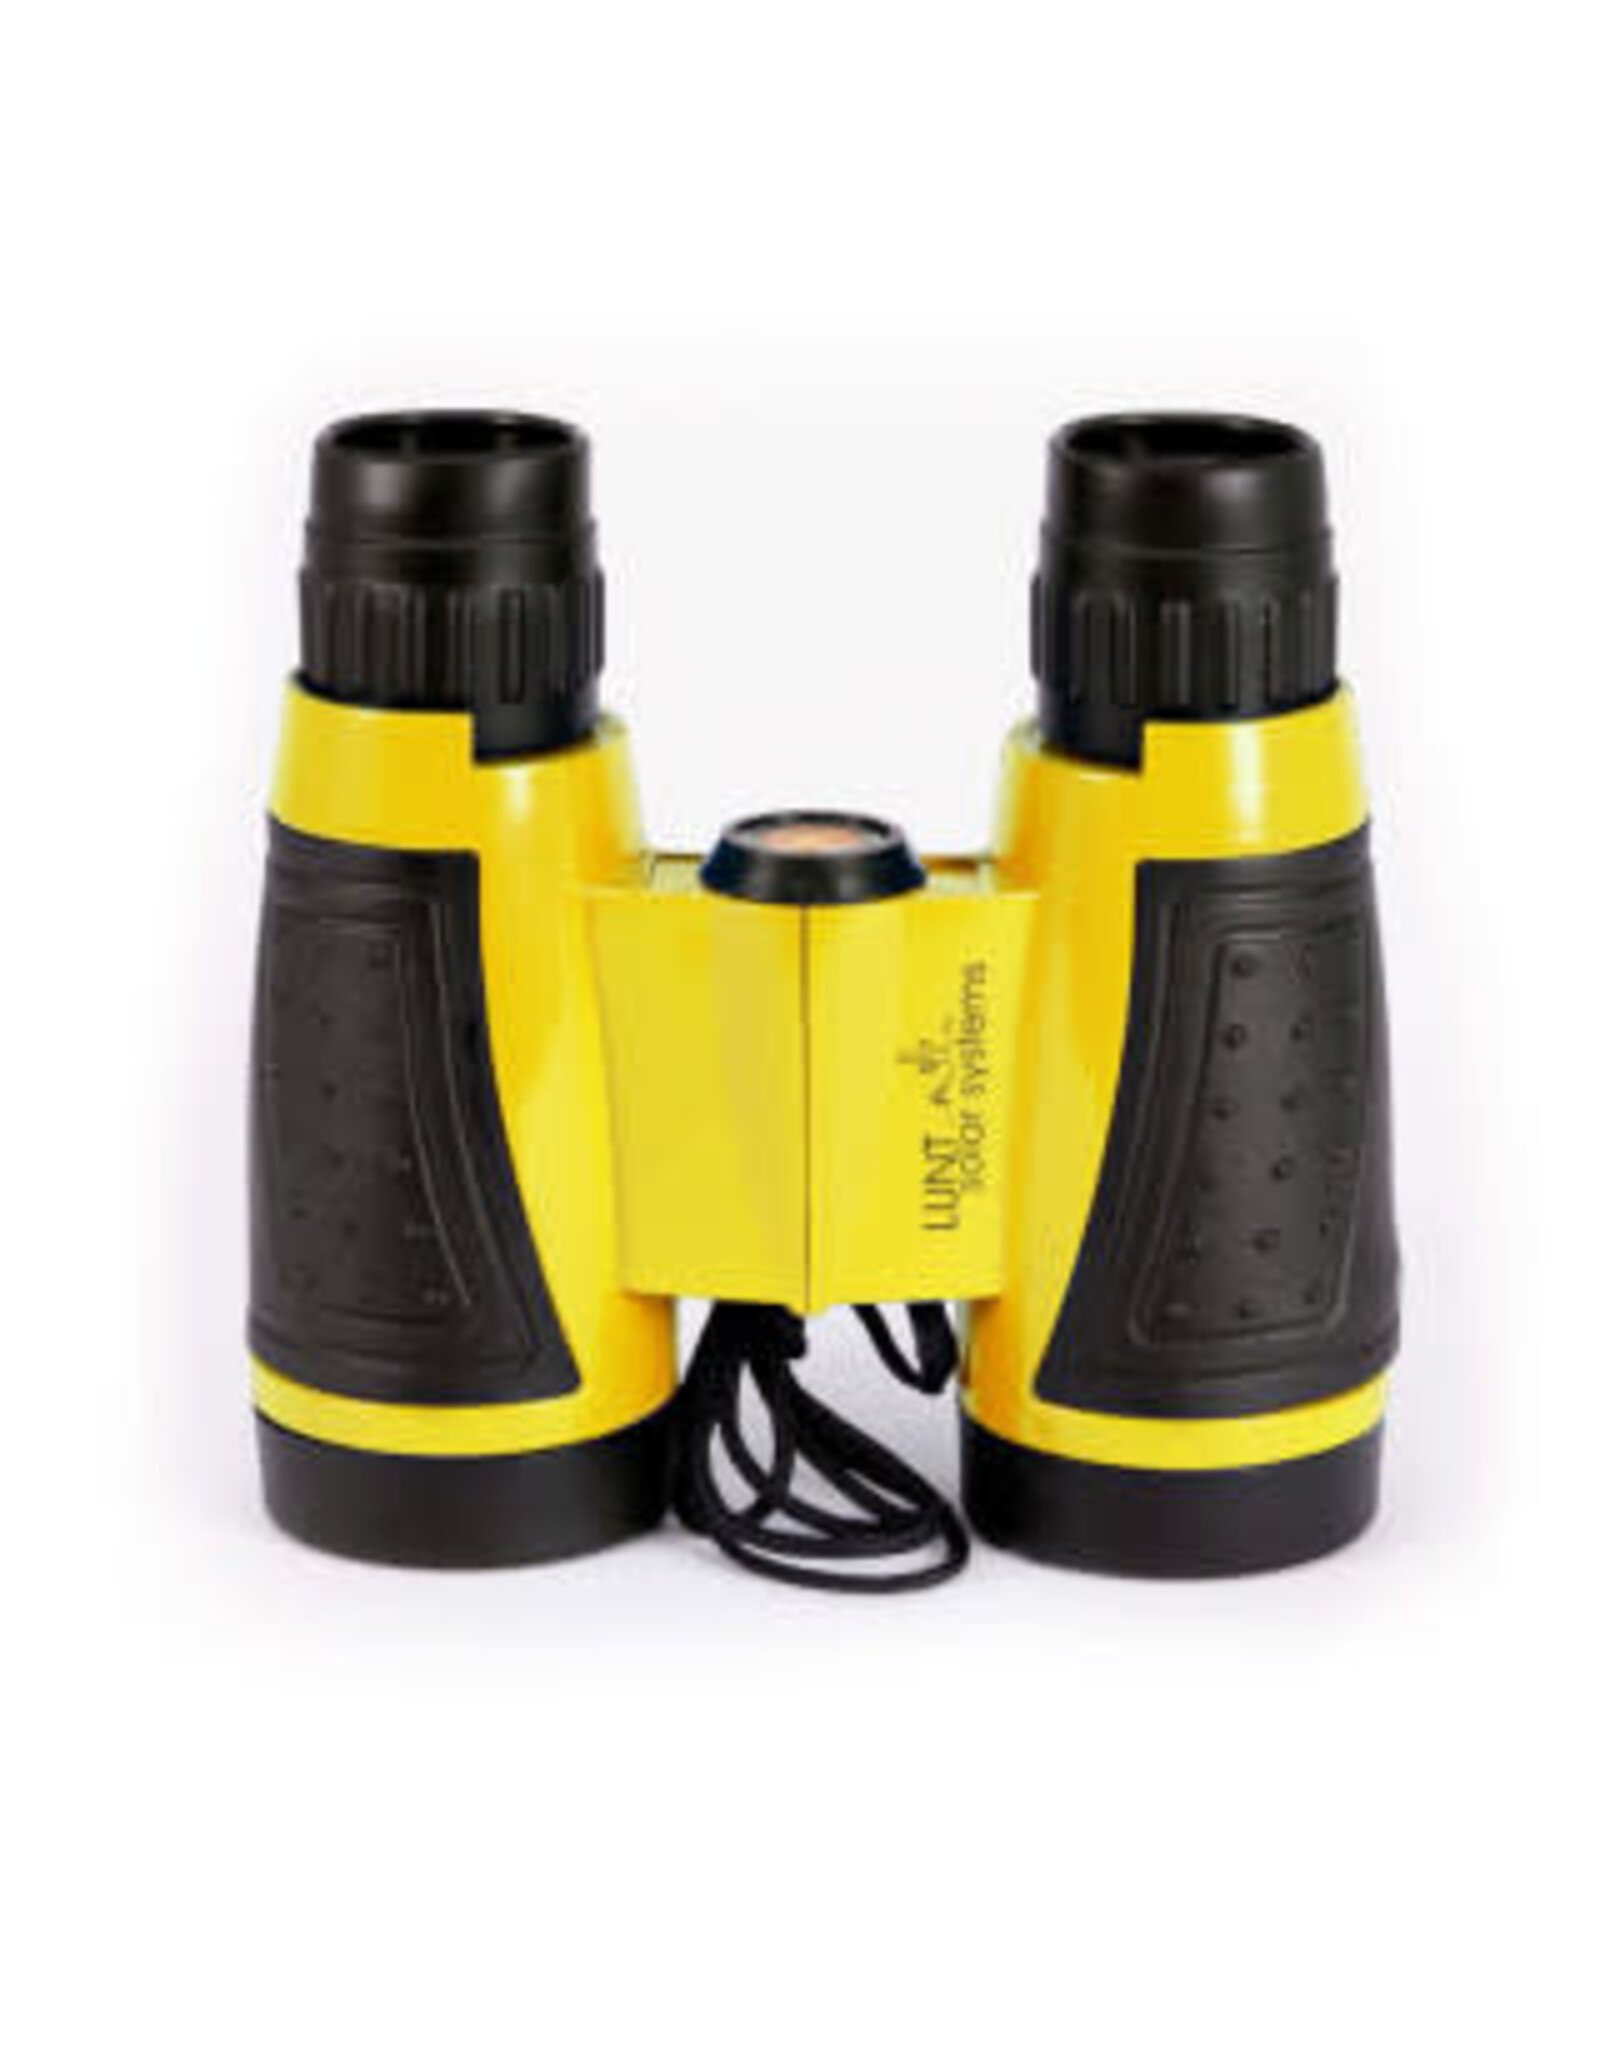 Lunt Lunt 6x30 Sunoculars (Specify Color - Blue, Red, Yellow)